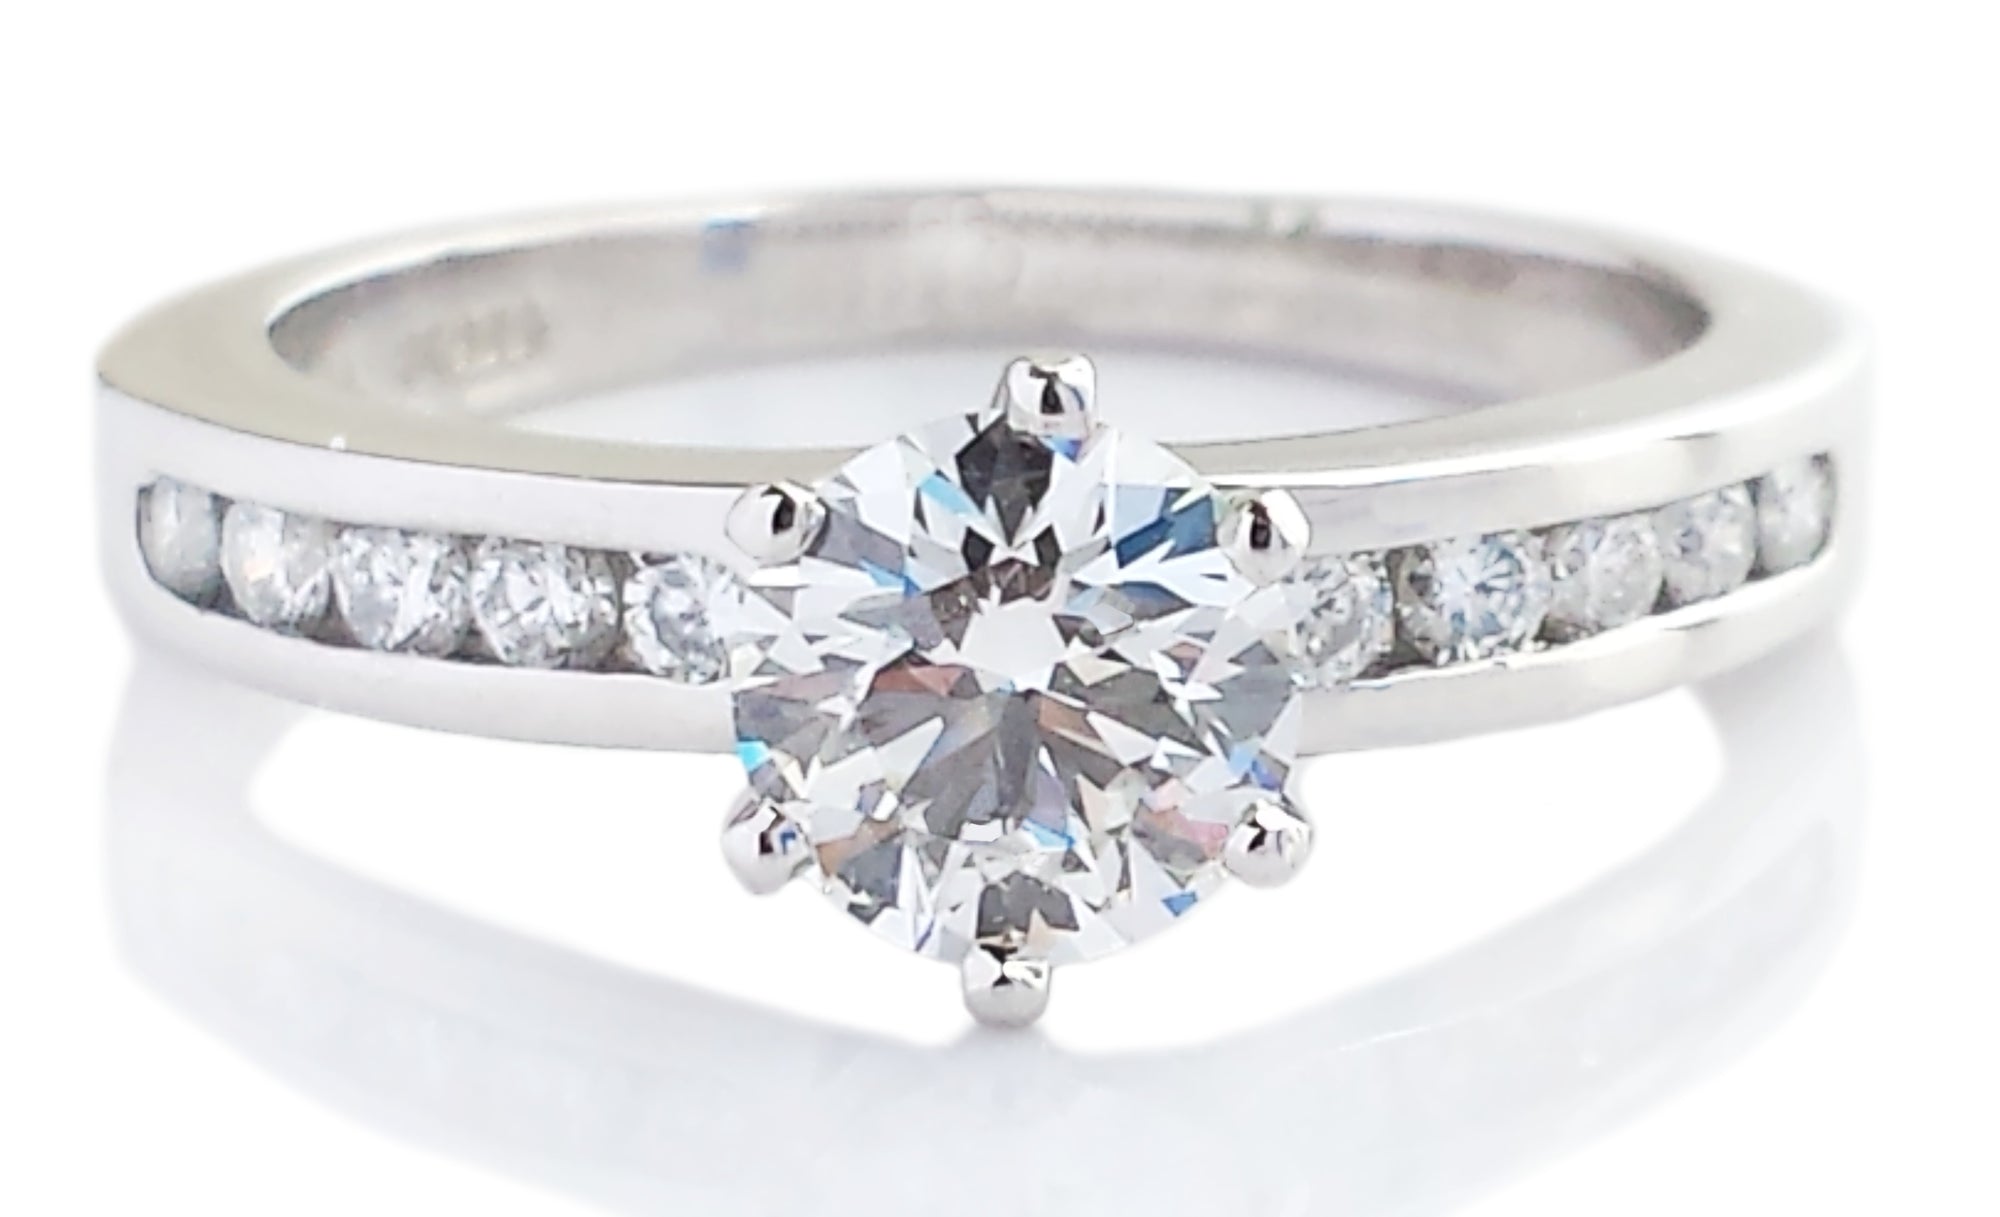 Tiffany & Co. 1.03tcw E/VS2 Round Brilliant Diamond Engagement Ring with Side Stones